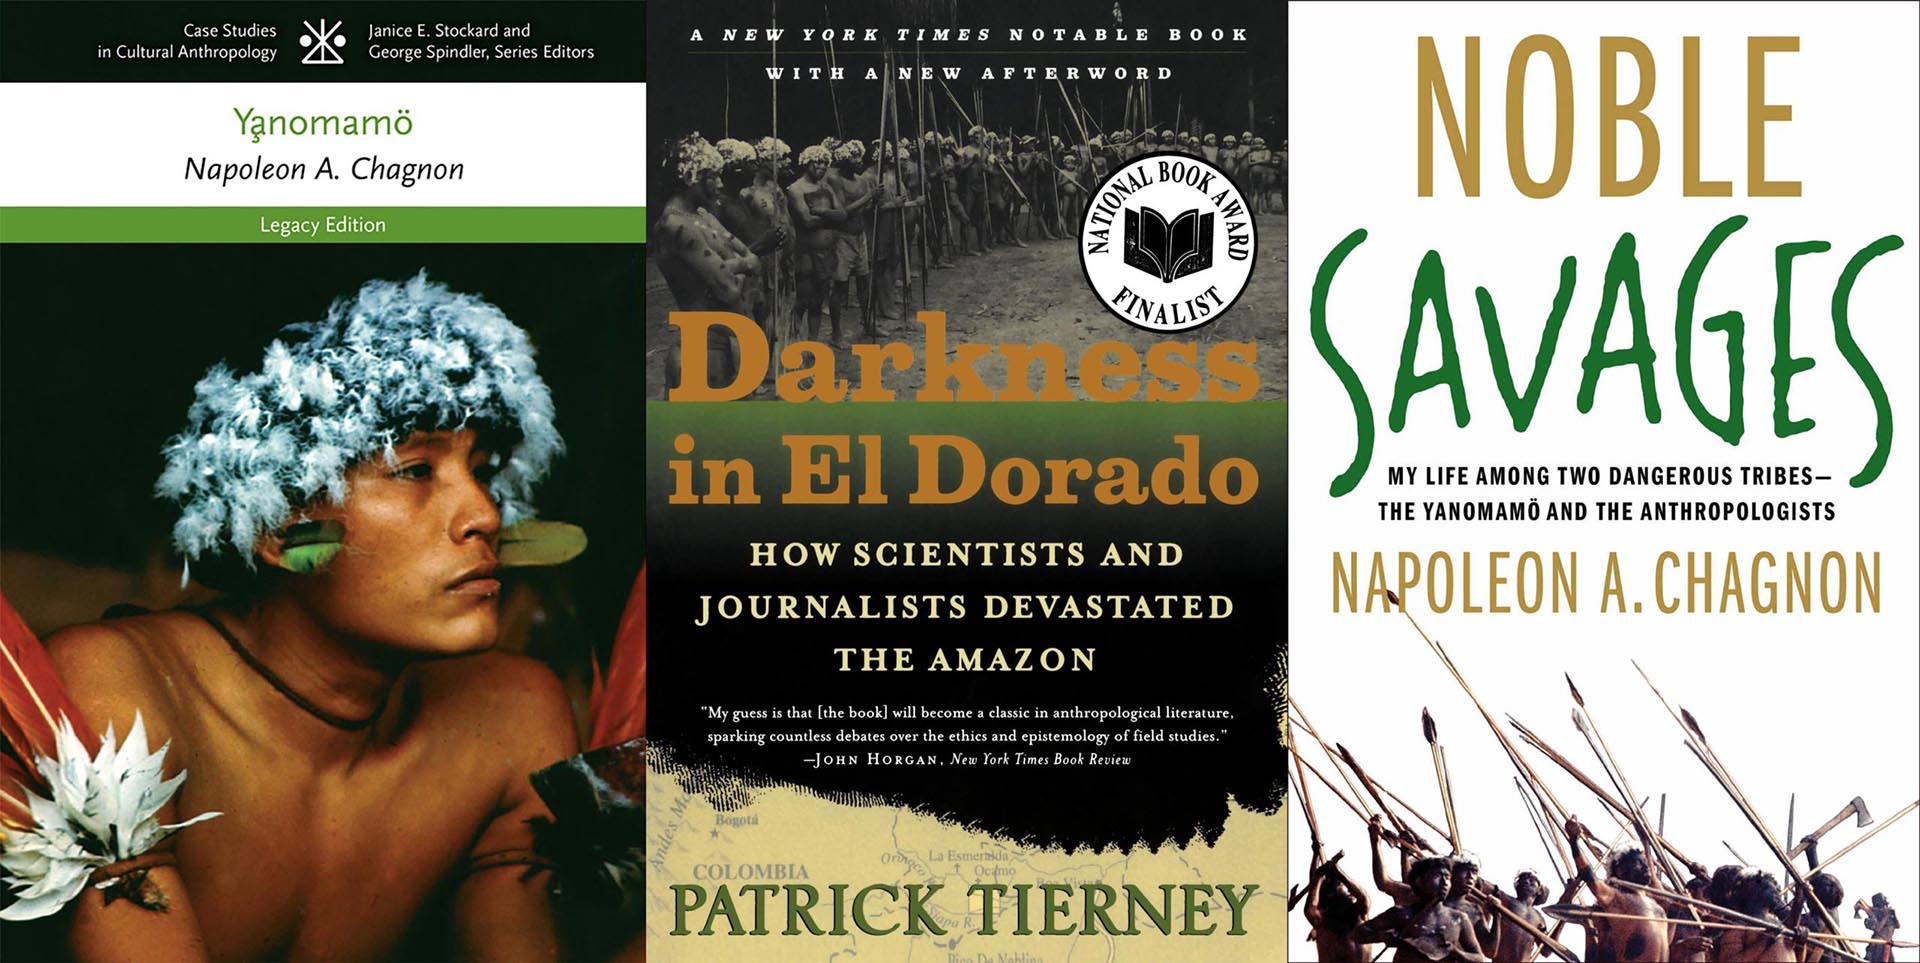 Books by Napoleon Chagnon and Patrick Teirney Related to the Darkness in El Dorado Controversy